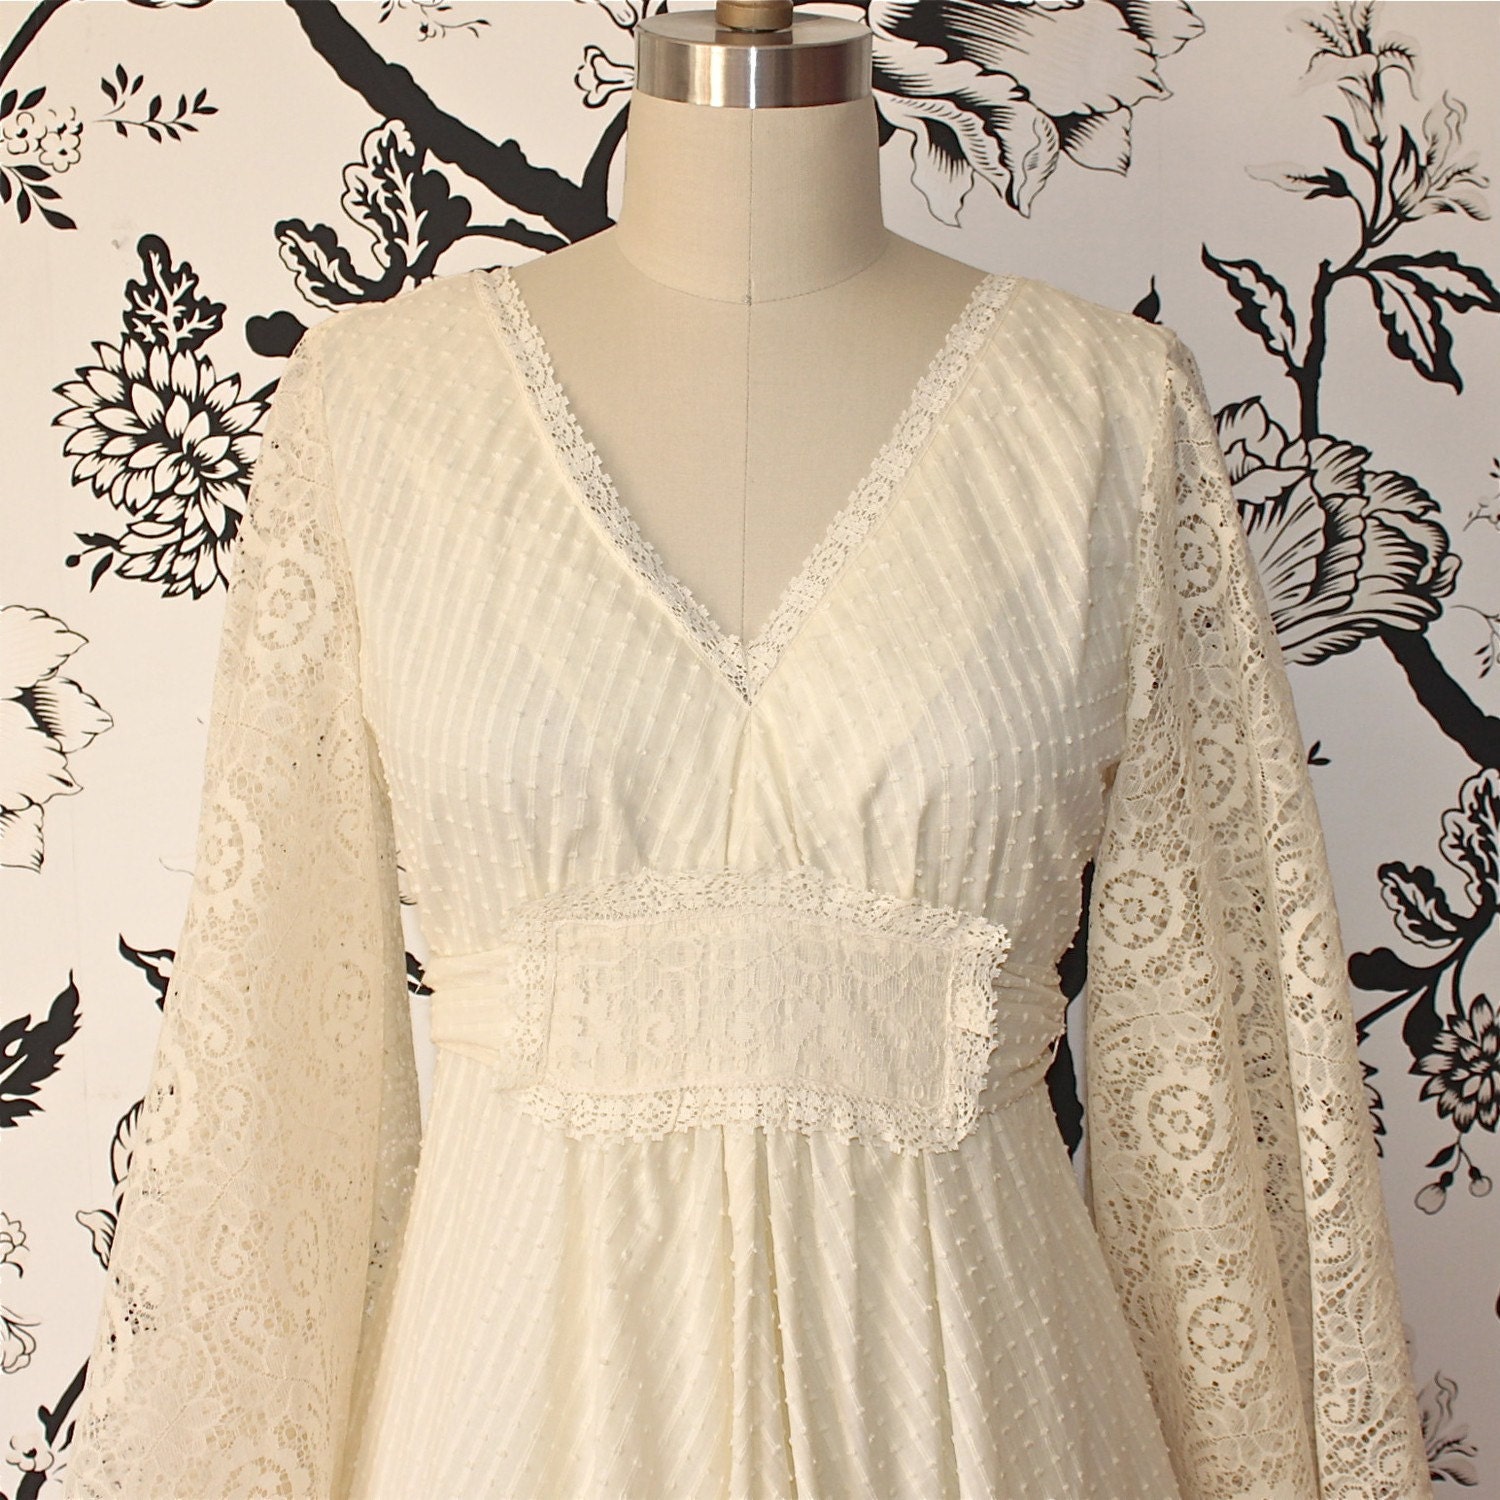 1970s vintage SWISS DOT cream WEDDING dress by salvagelife on Etsy